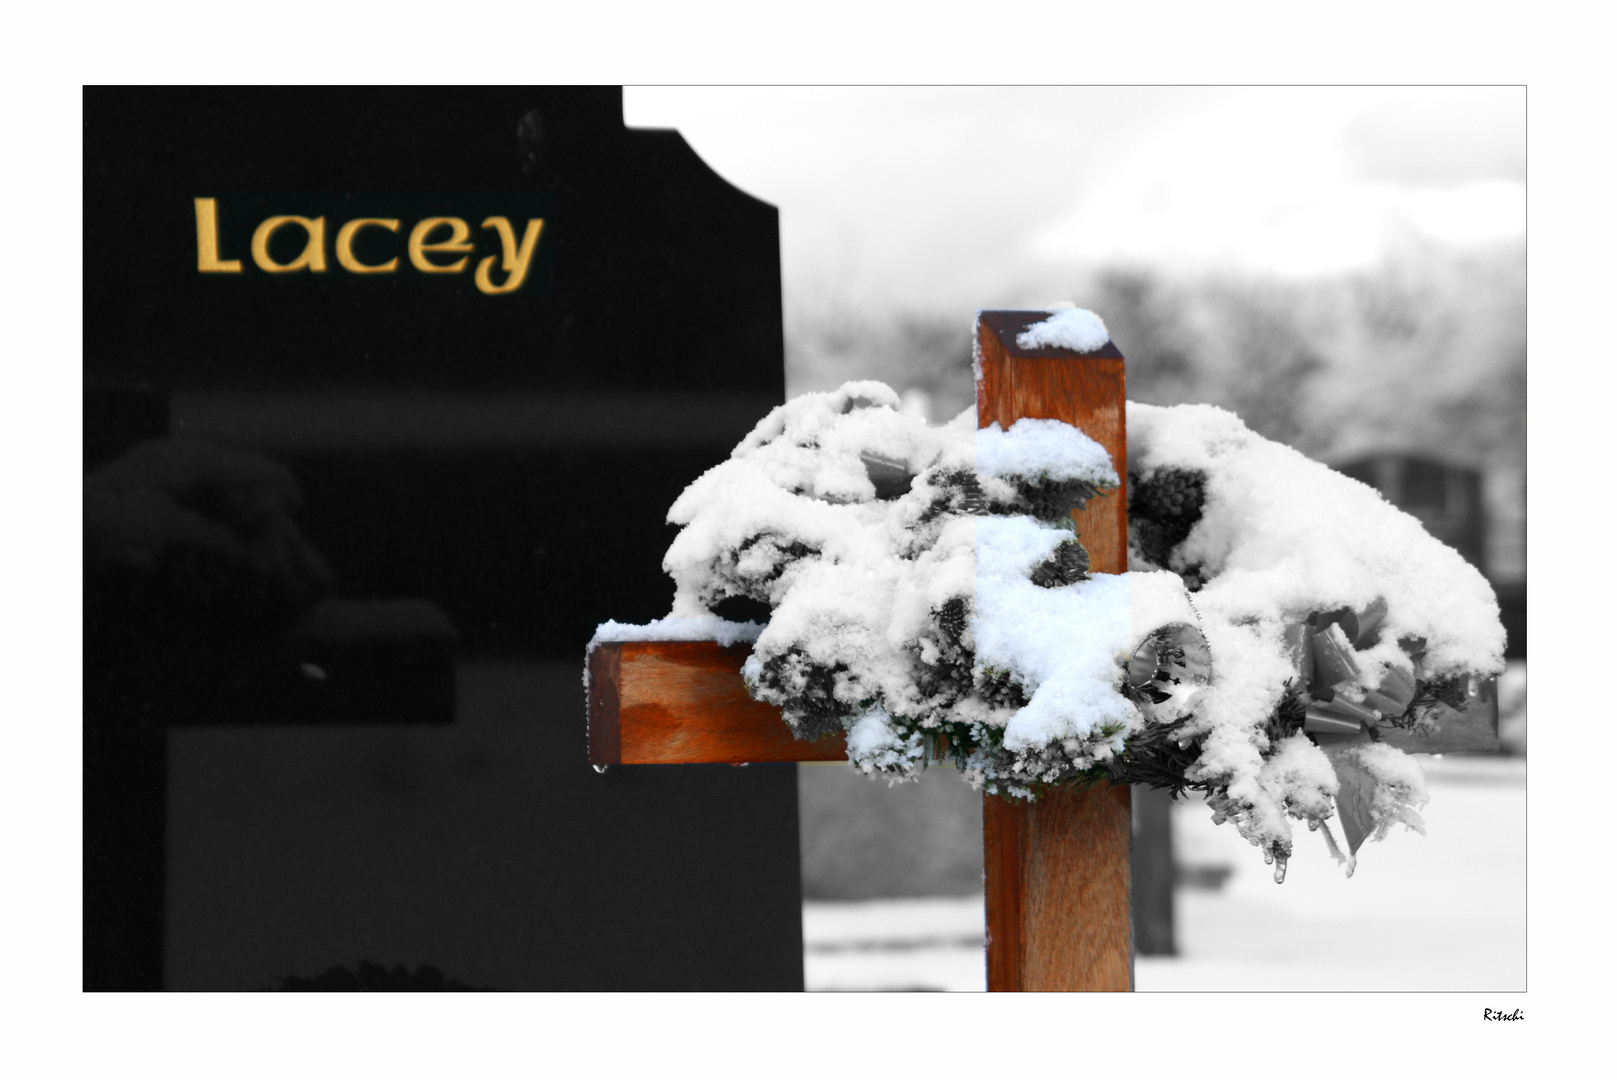 Lacey's grave